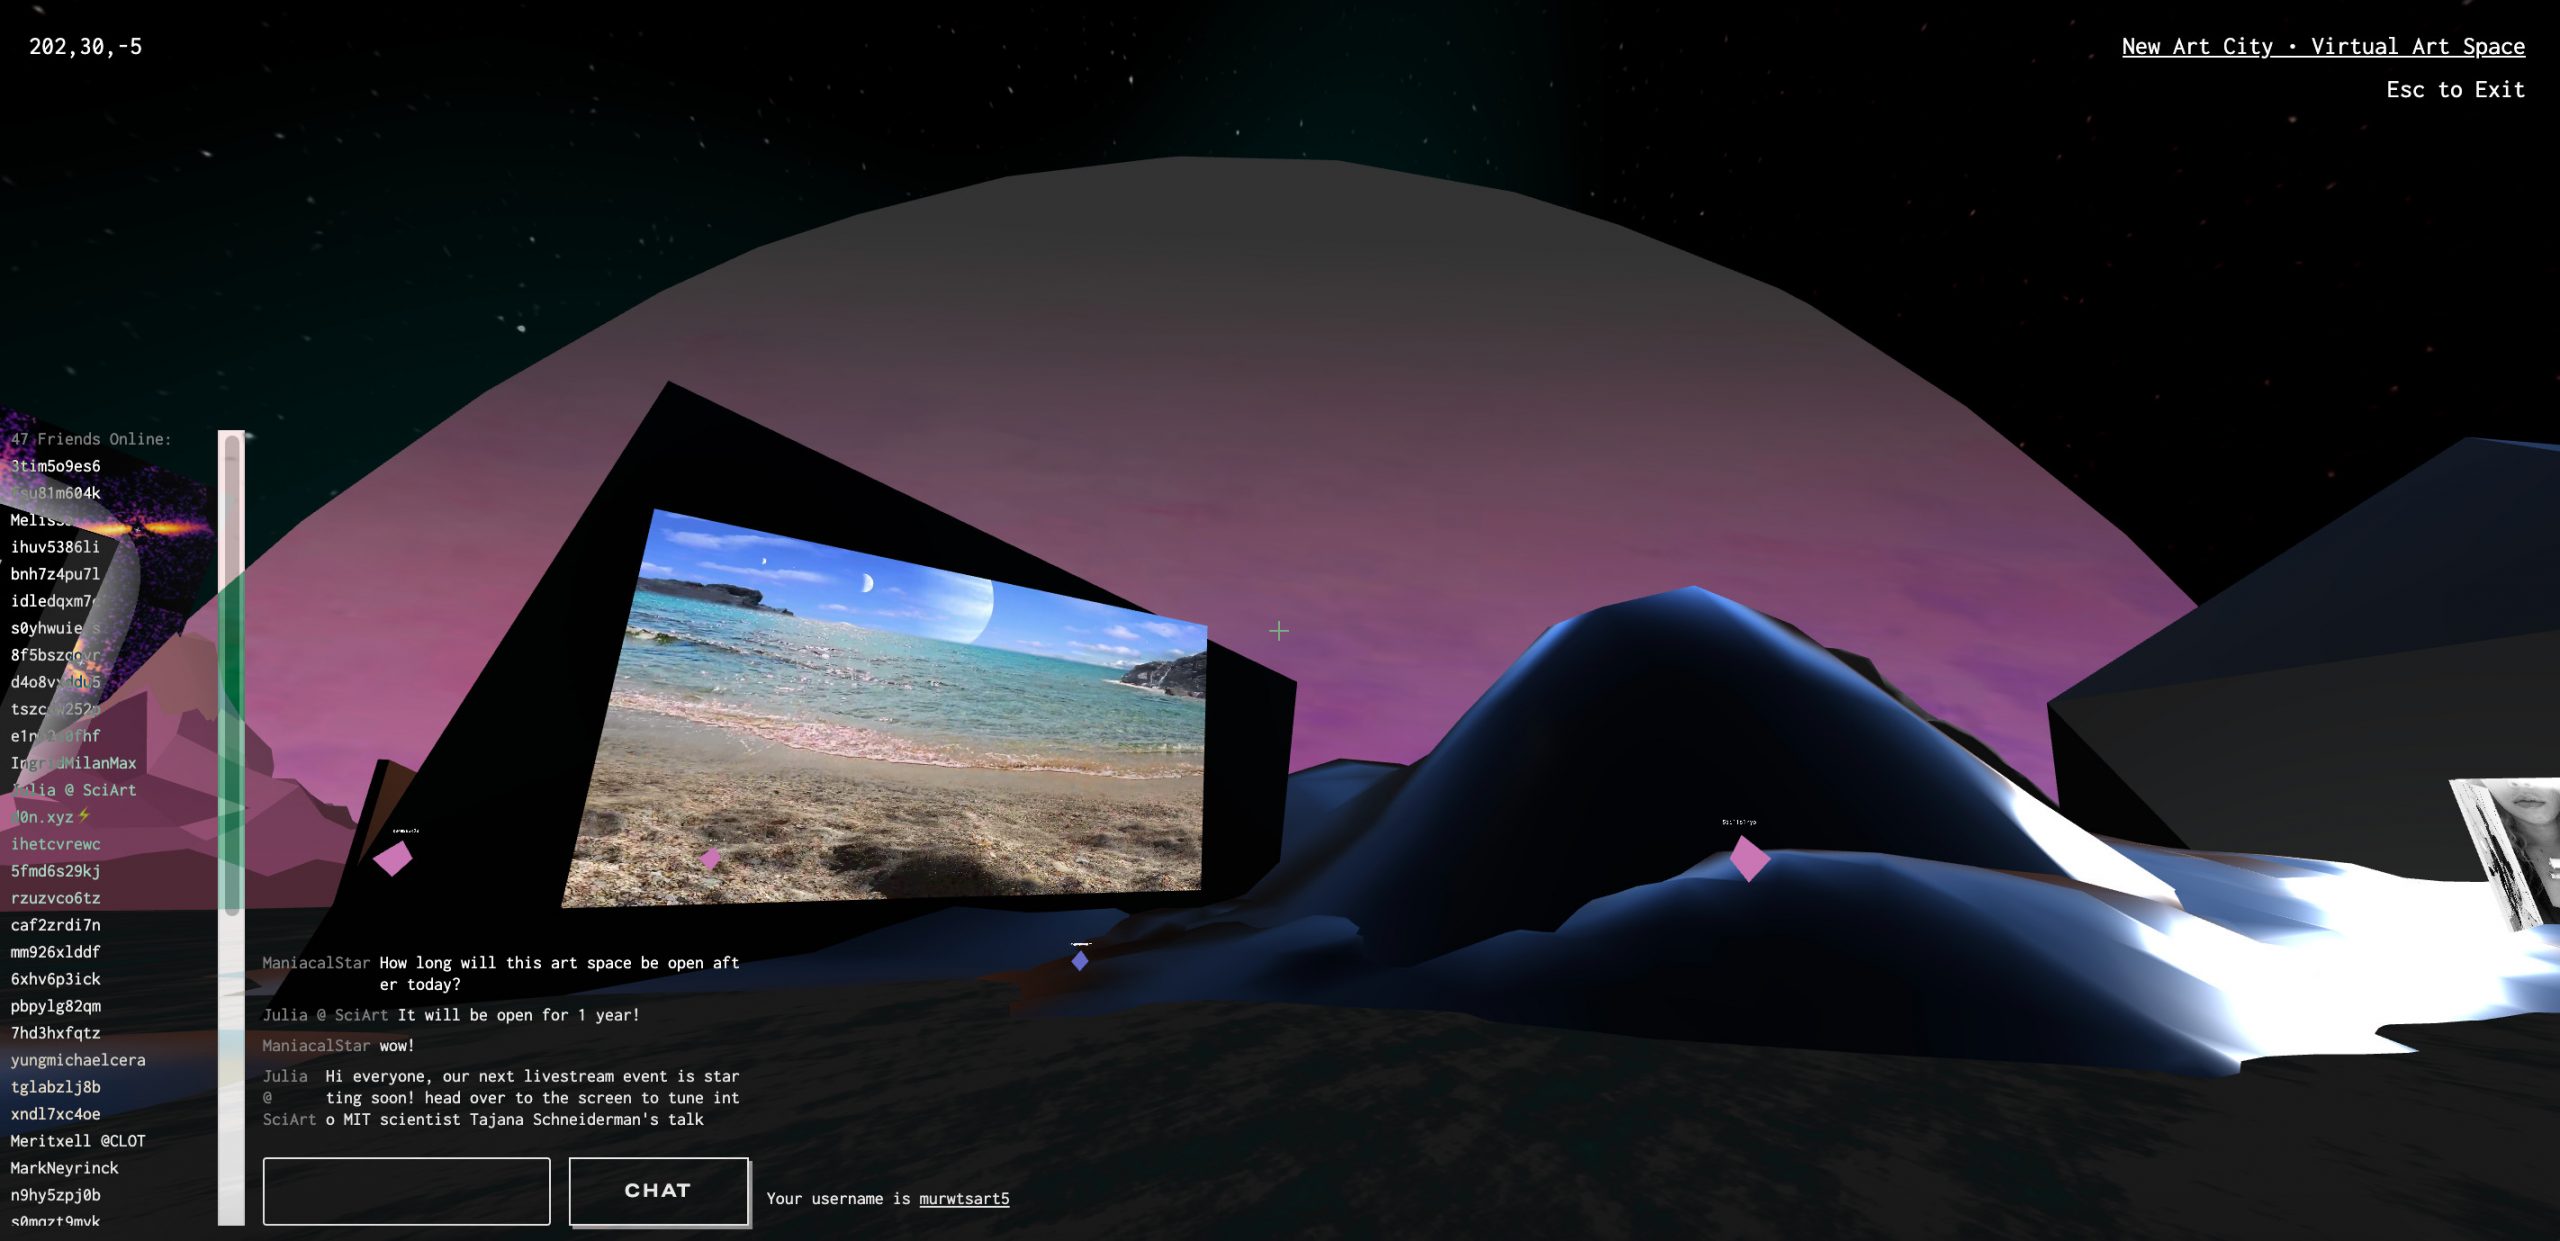 Dark series of hills next to a large screen showing the shore of an ocean. Behind them is the top of a large pink planet.